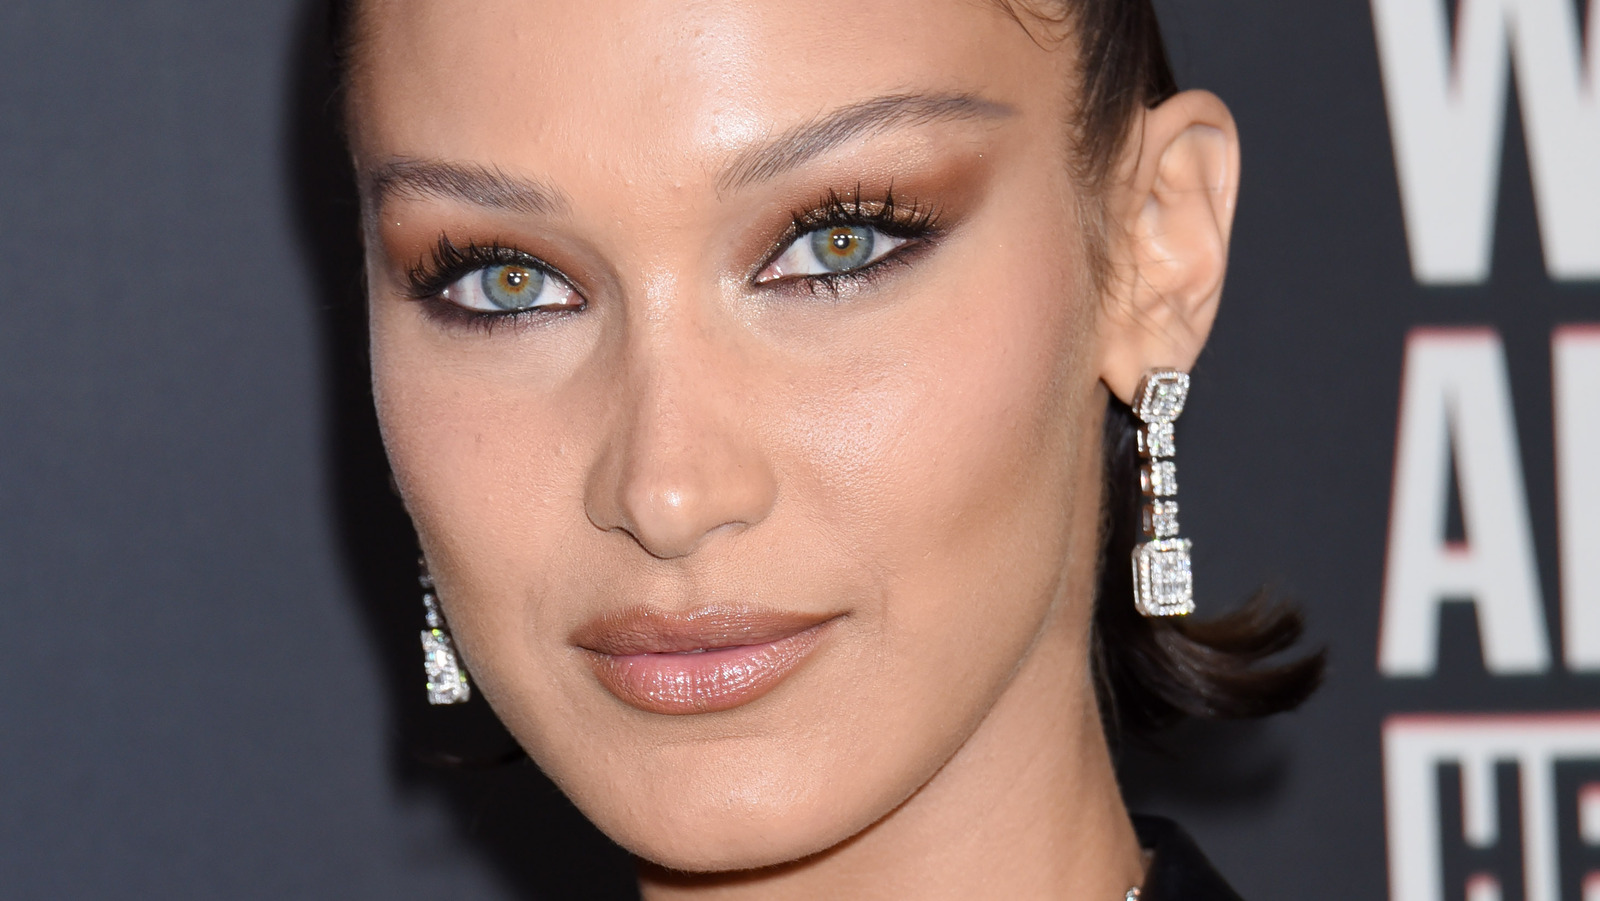 Bella Hadid Said Her Party Girl Days Are a Thing of the Past